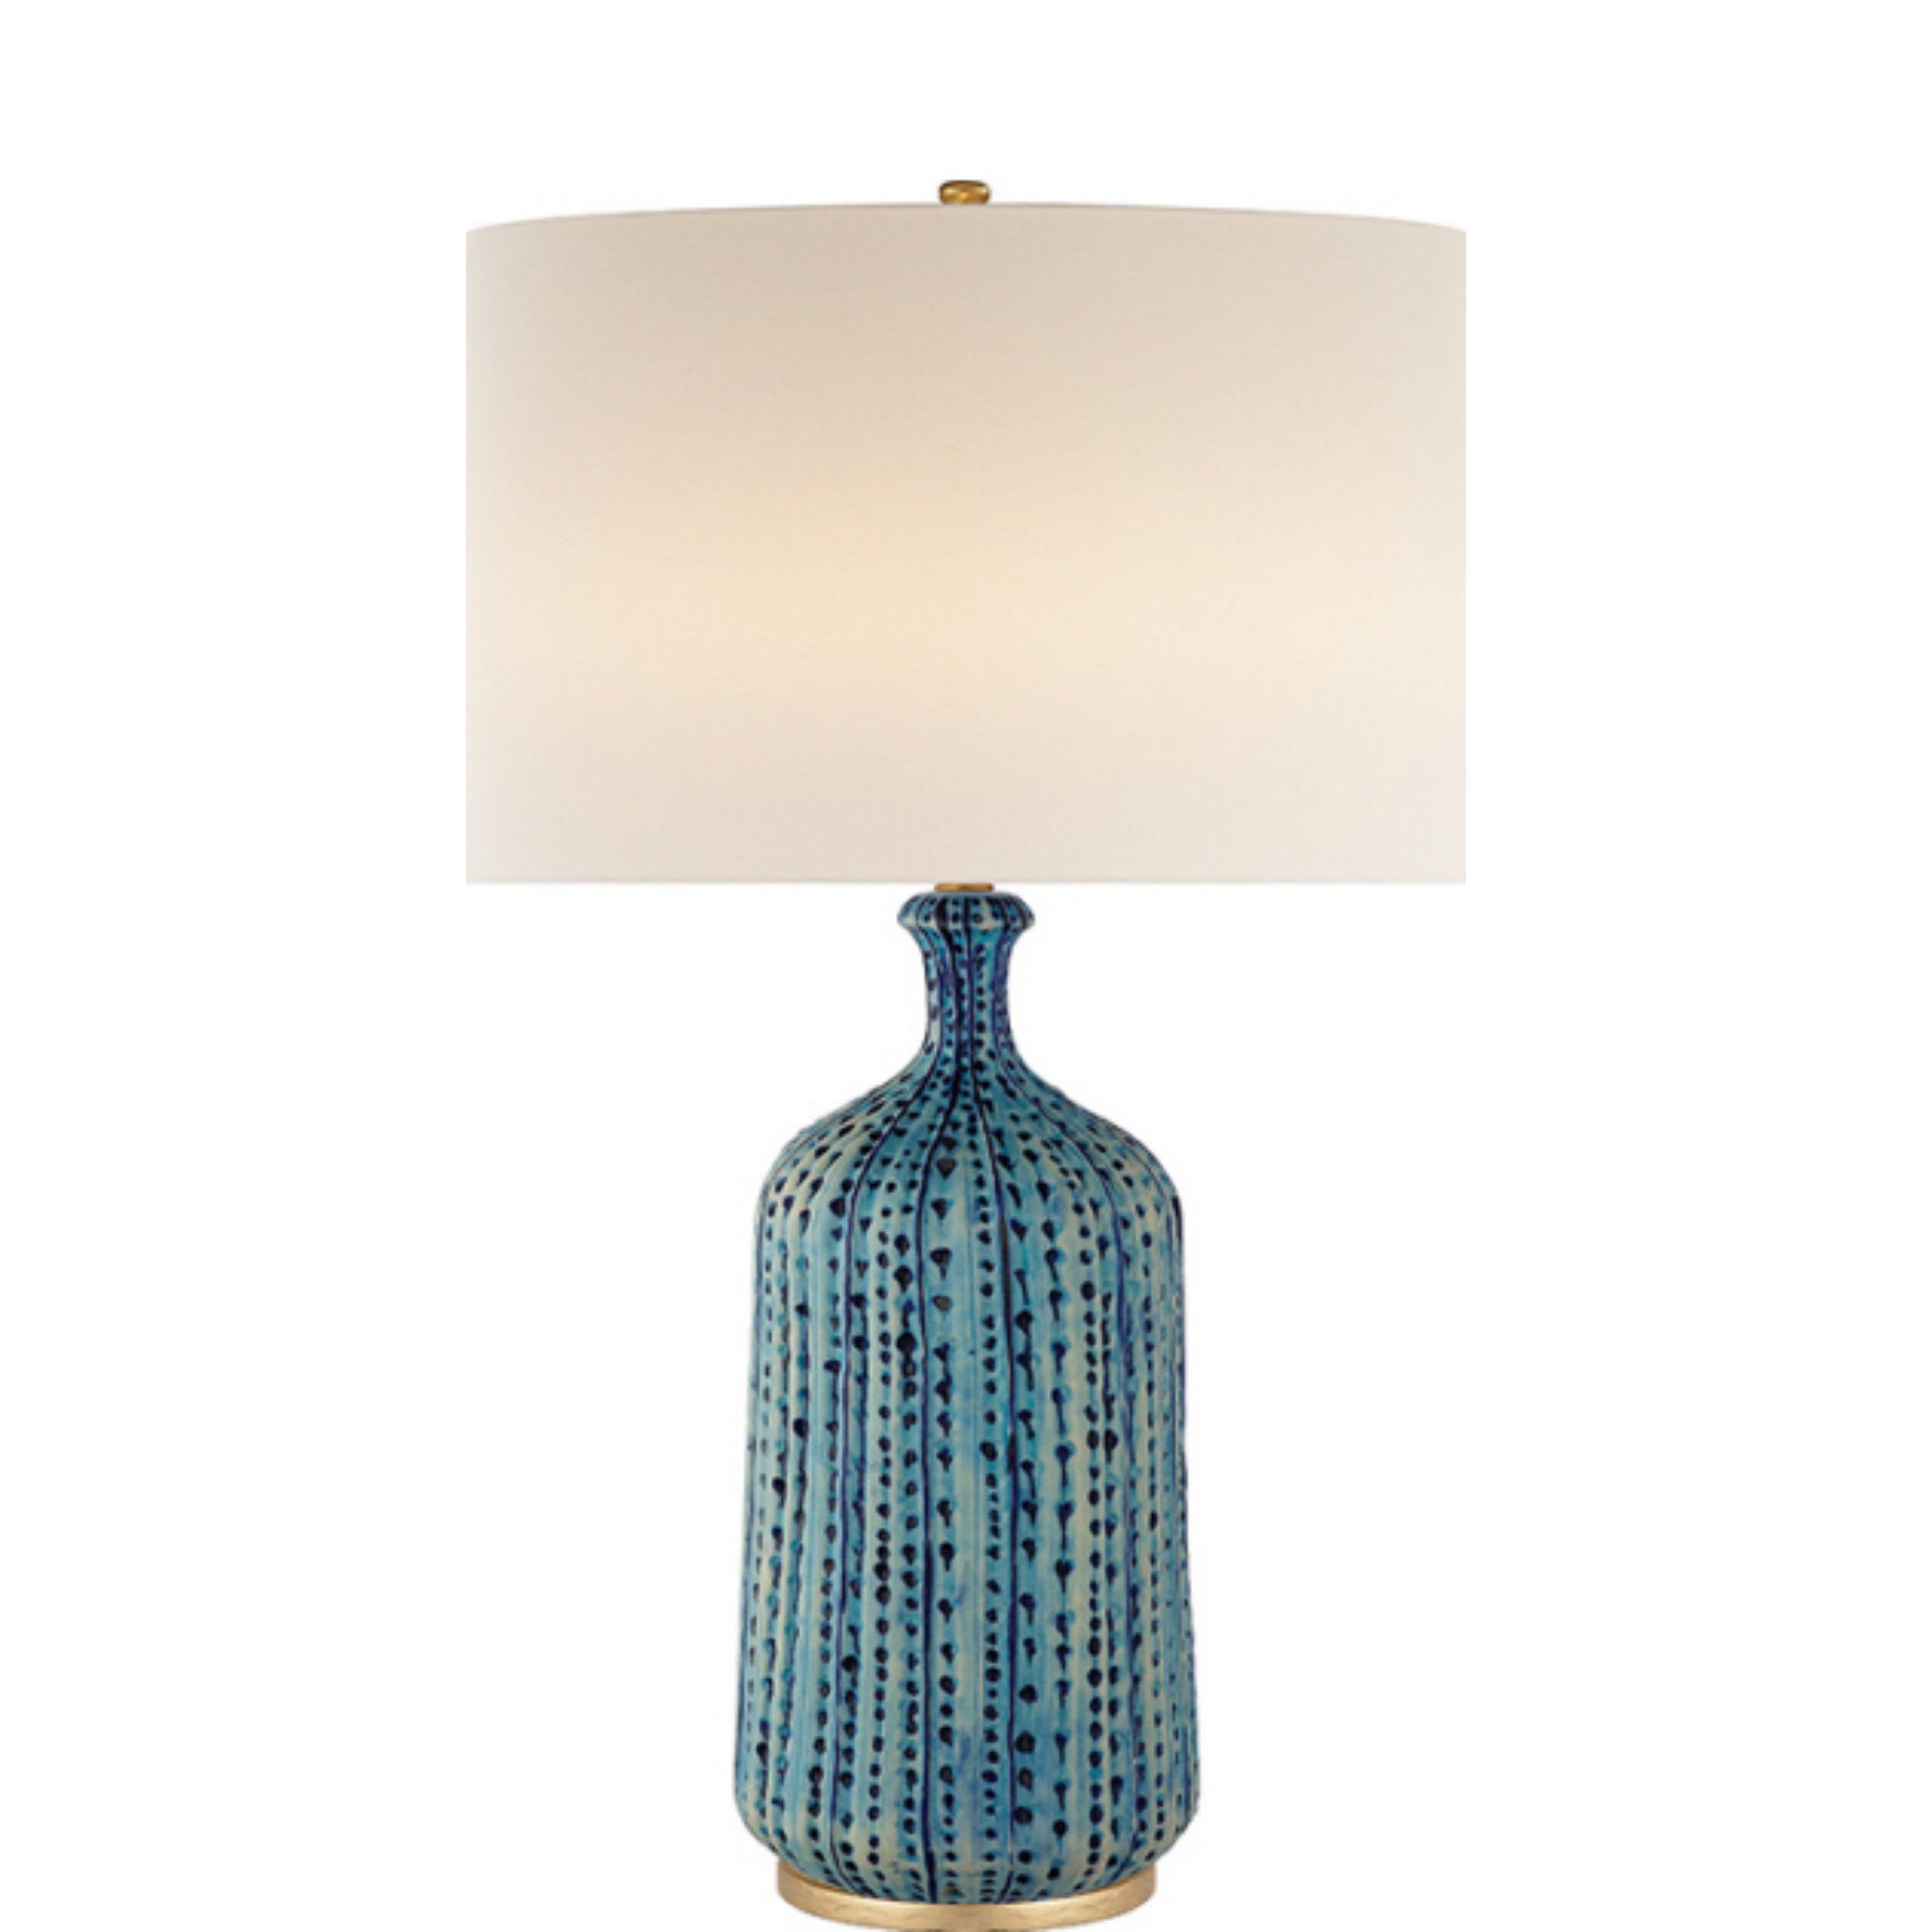 AERIN Culloden Table Lamp in Pebbled Aquamarine with Linen Shade